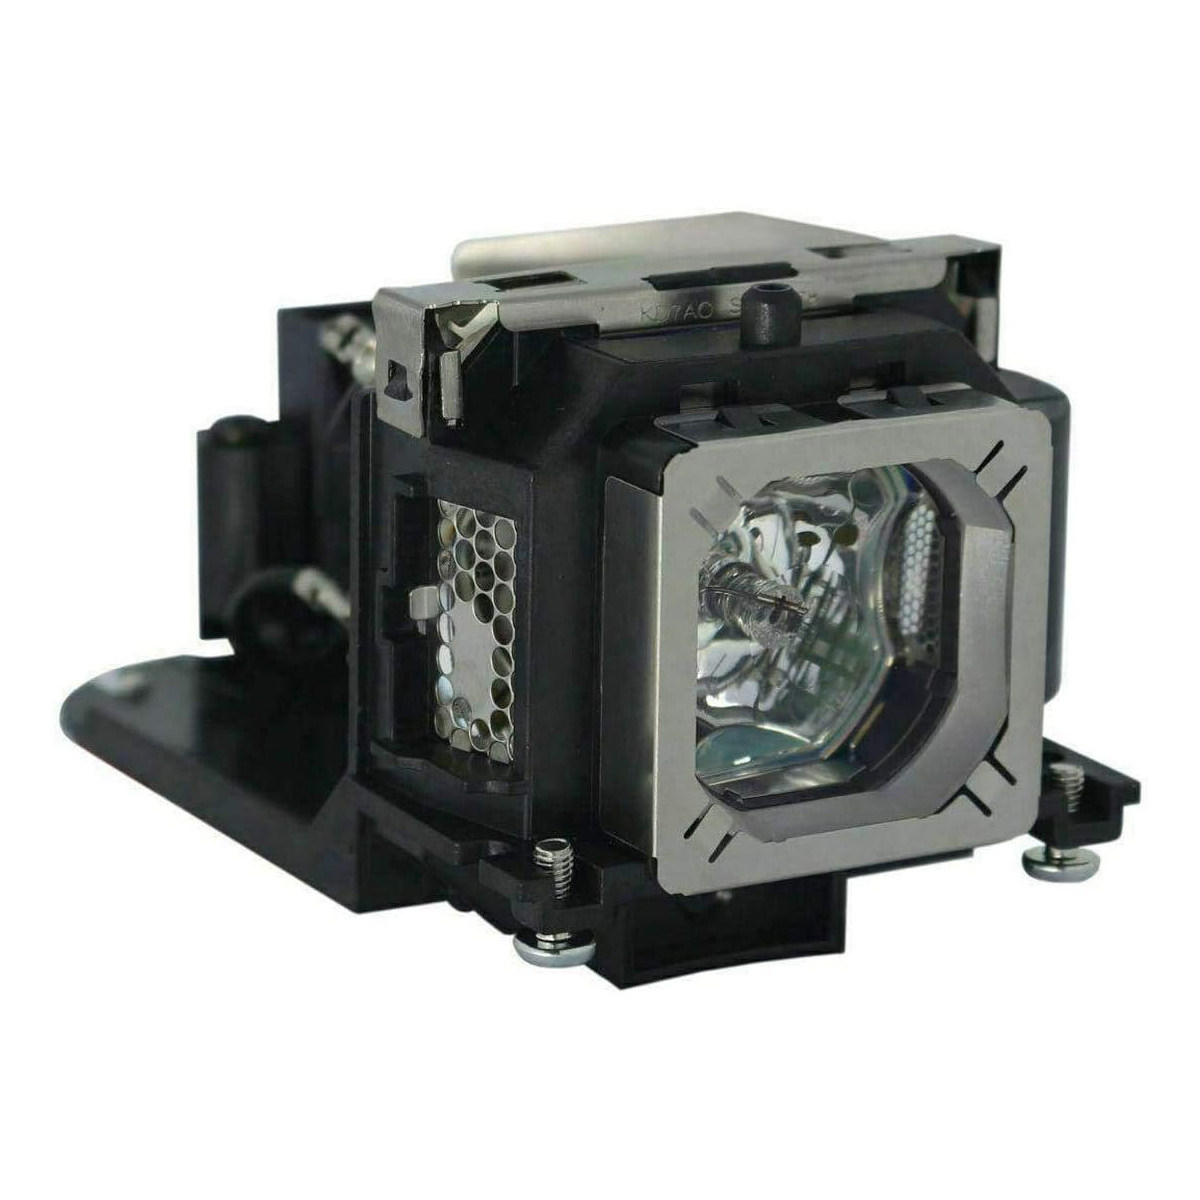 Replacement Projector lamp POA-LMP123 For Sanyo SANYO PLC-XW60